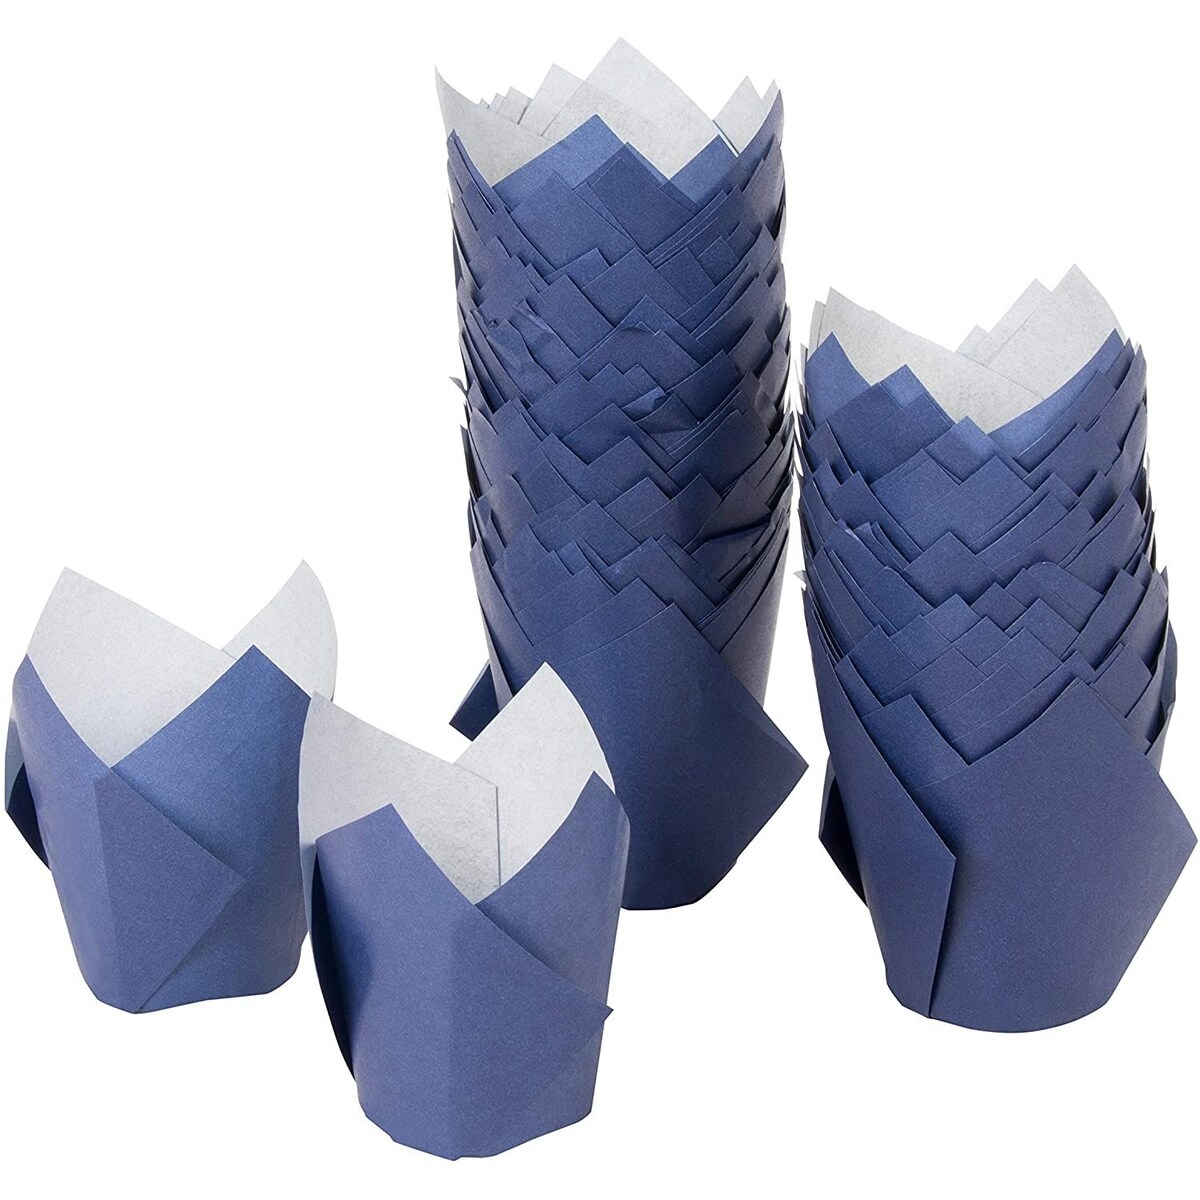 Tulip Cupcake Liners - 100-Pack Medium Baking Cups, Muffin Wrappers, Perfect for Birthday Parties, Weddings, Baby Showers, Bakeries, Catering, Restaurants, Navy Blue